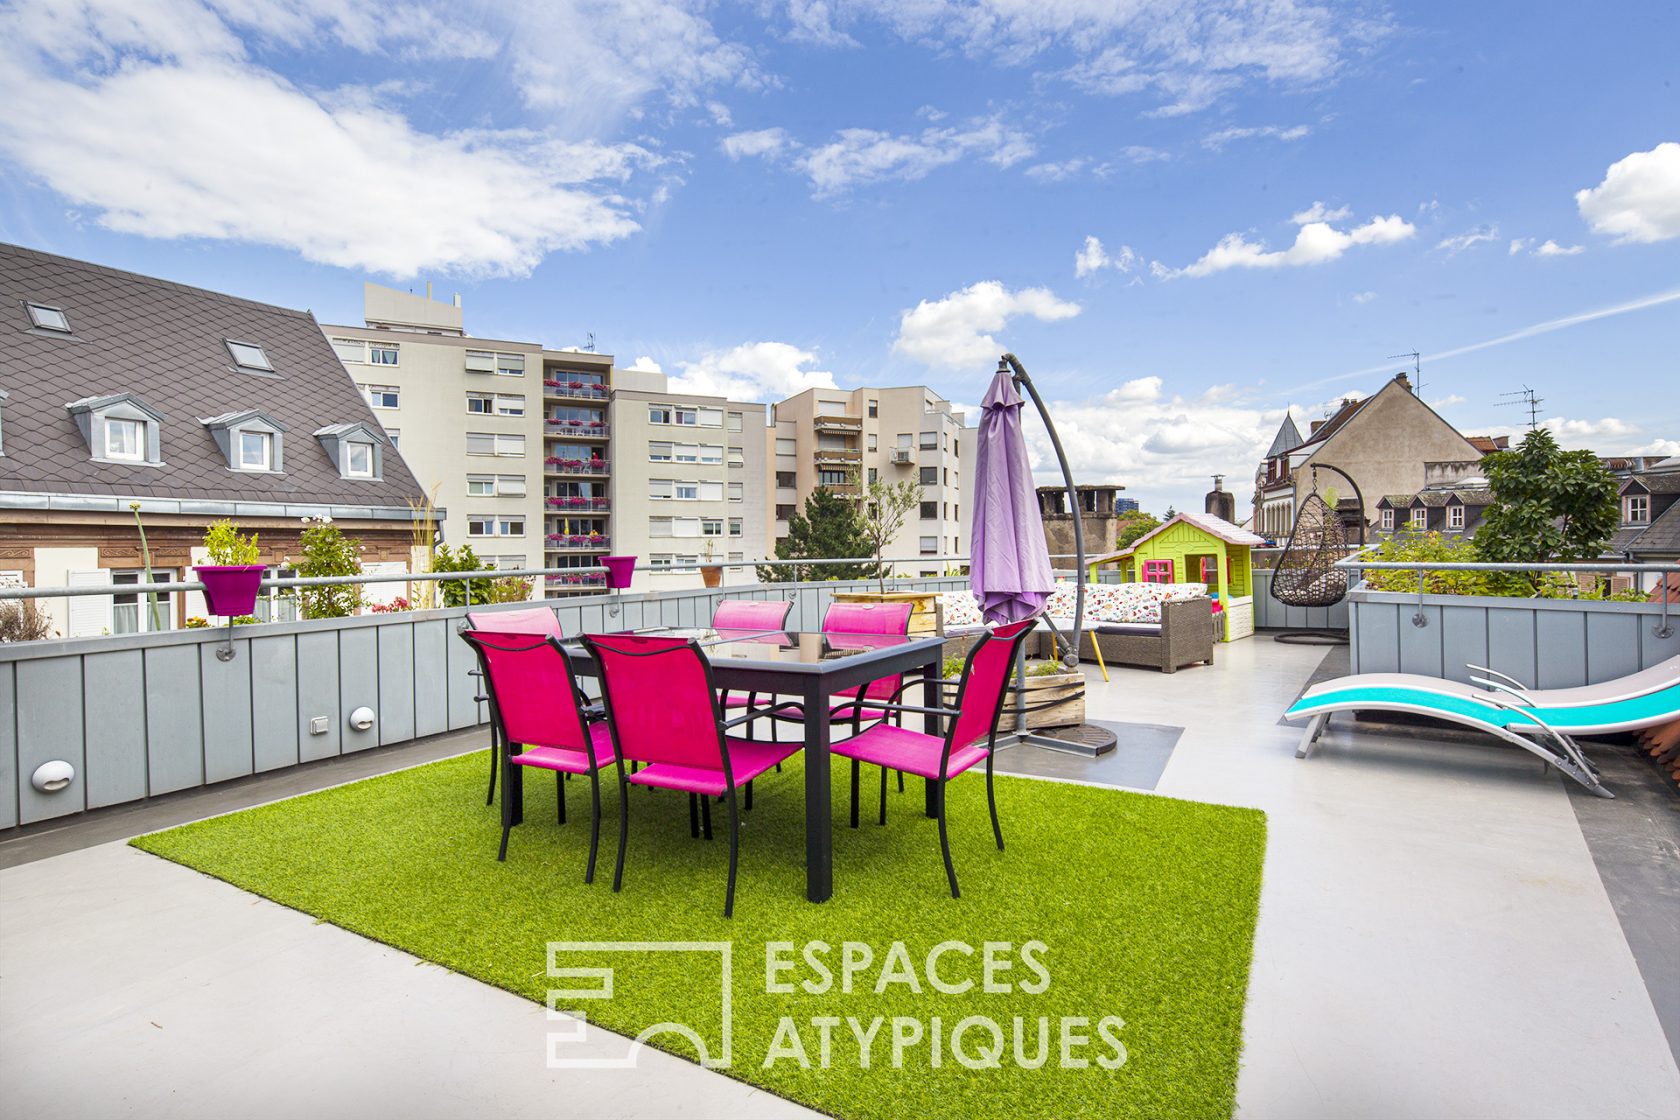 Duplex and its roof terrace